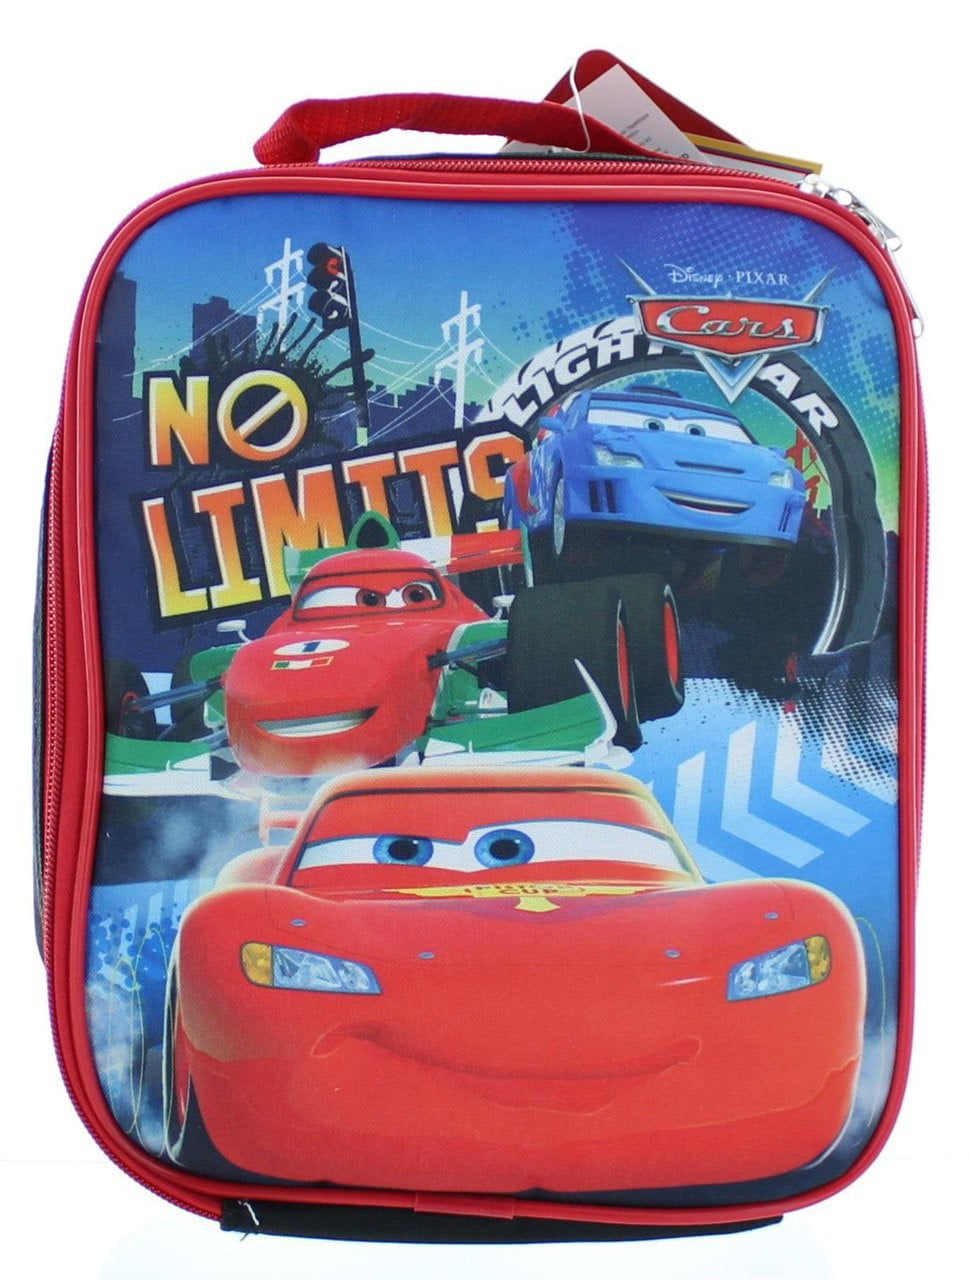 Disney Pixar Cars Lunch Pale complete set New Free shipping. 